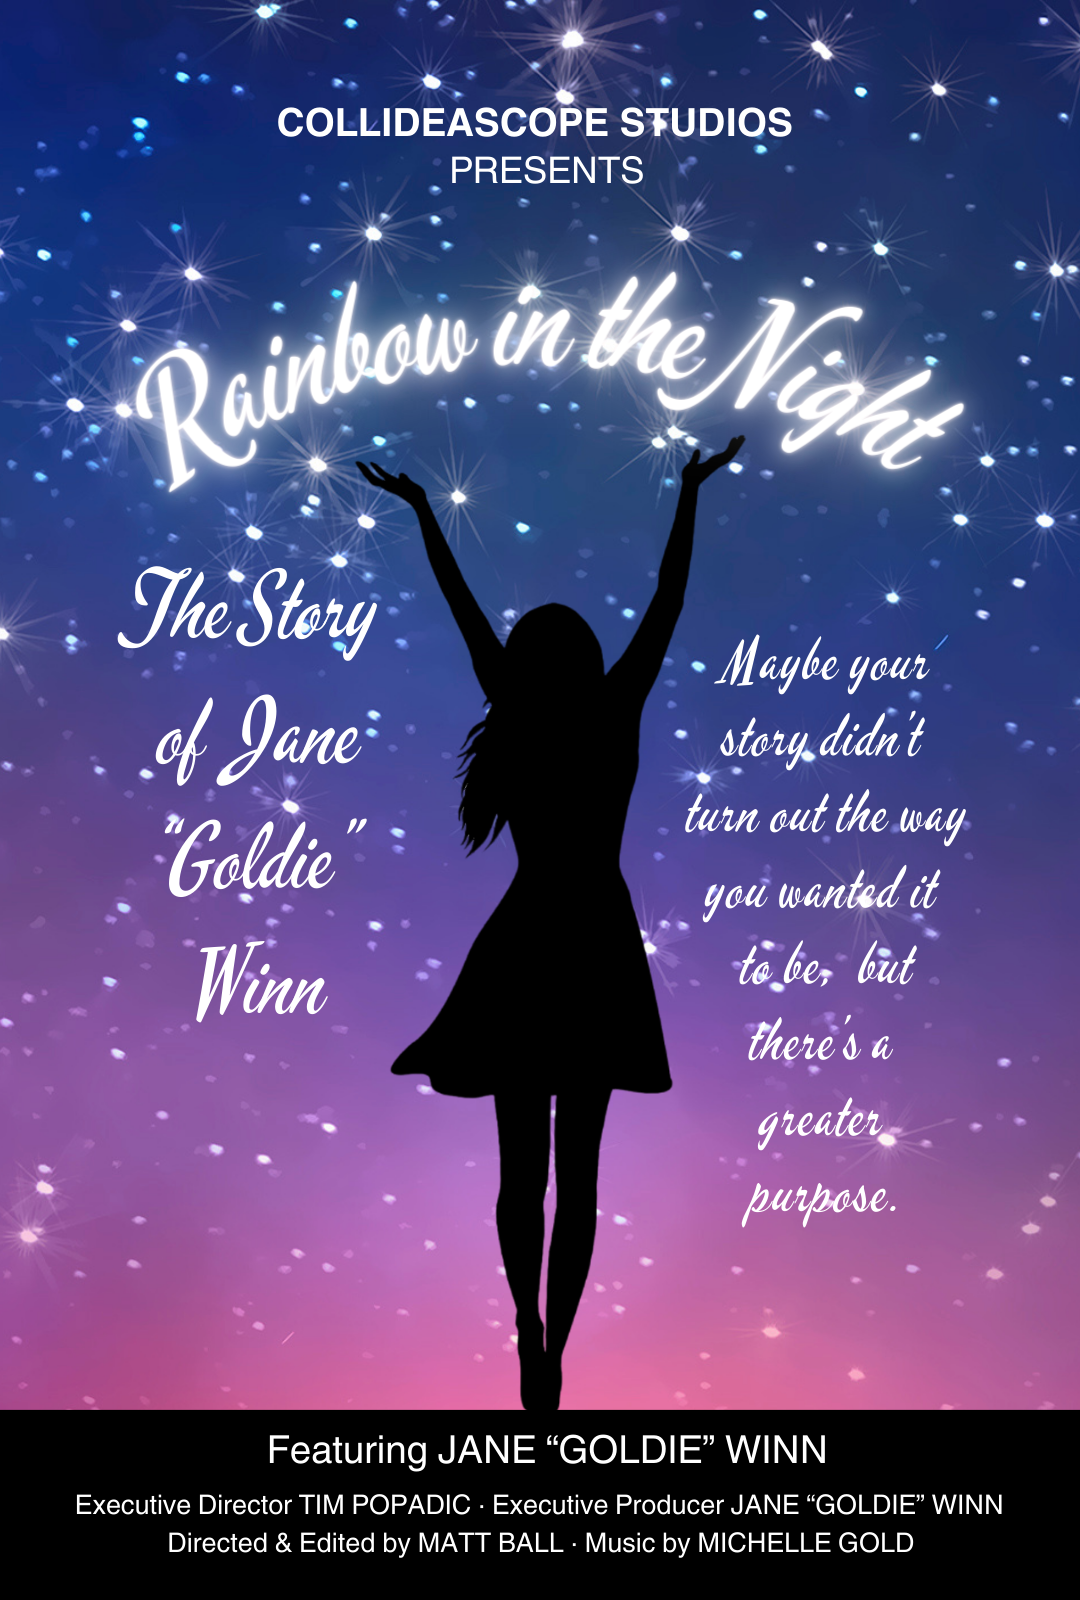 Poster for the Rainbow in the Night Movie Premiere June 4, 2023 in Delray Beach Florida